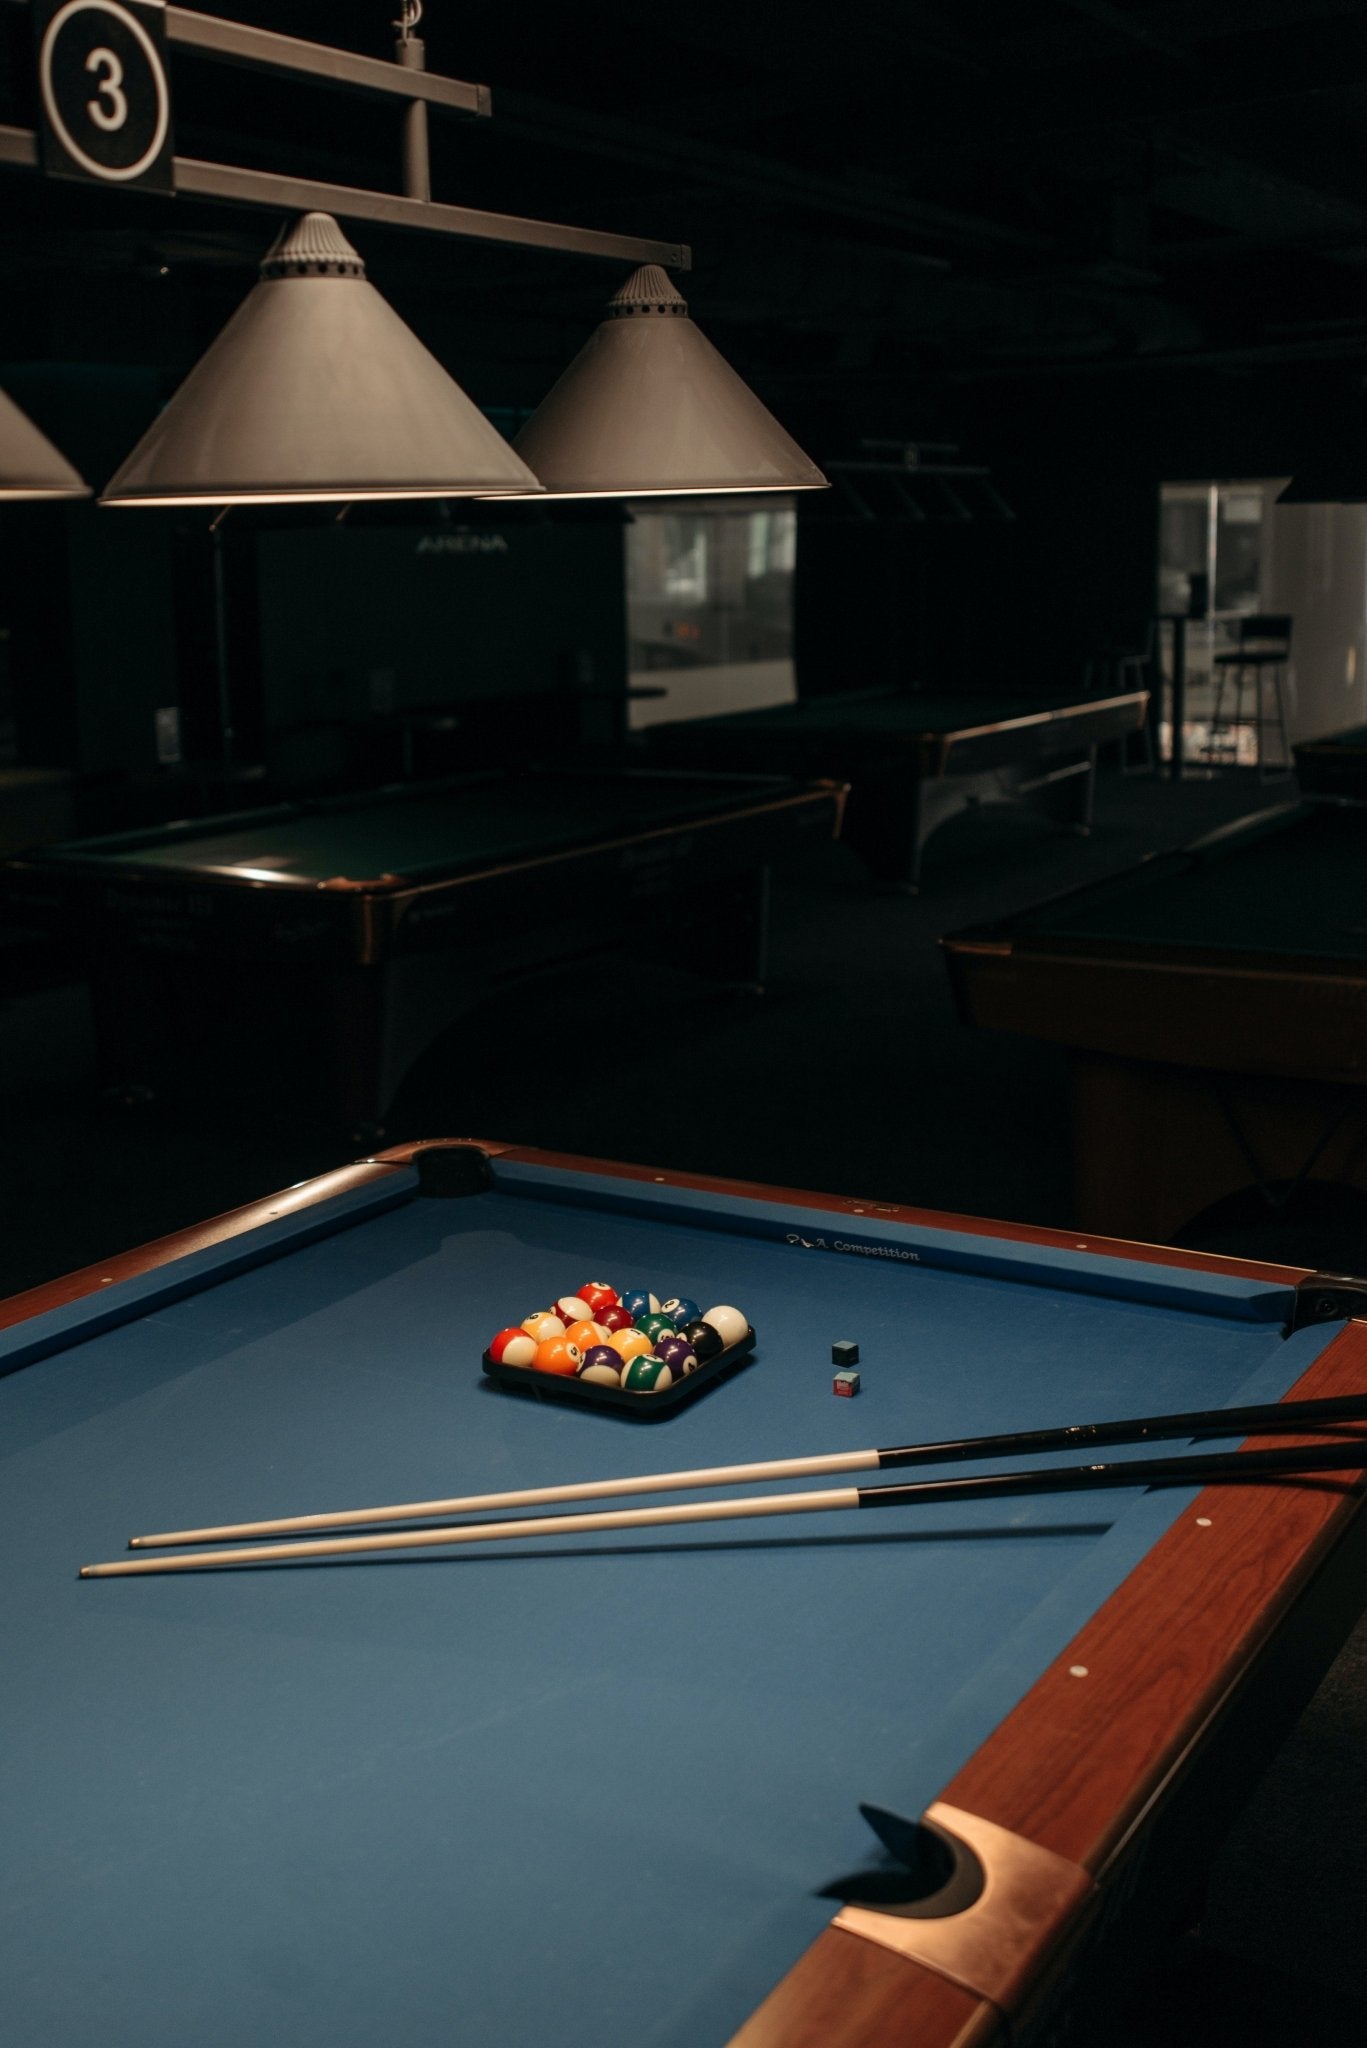 Billiards Legends Who Changed the Game - Billiard and Pool Center